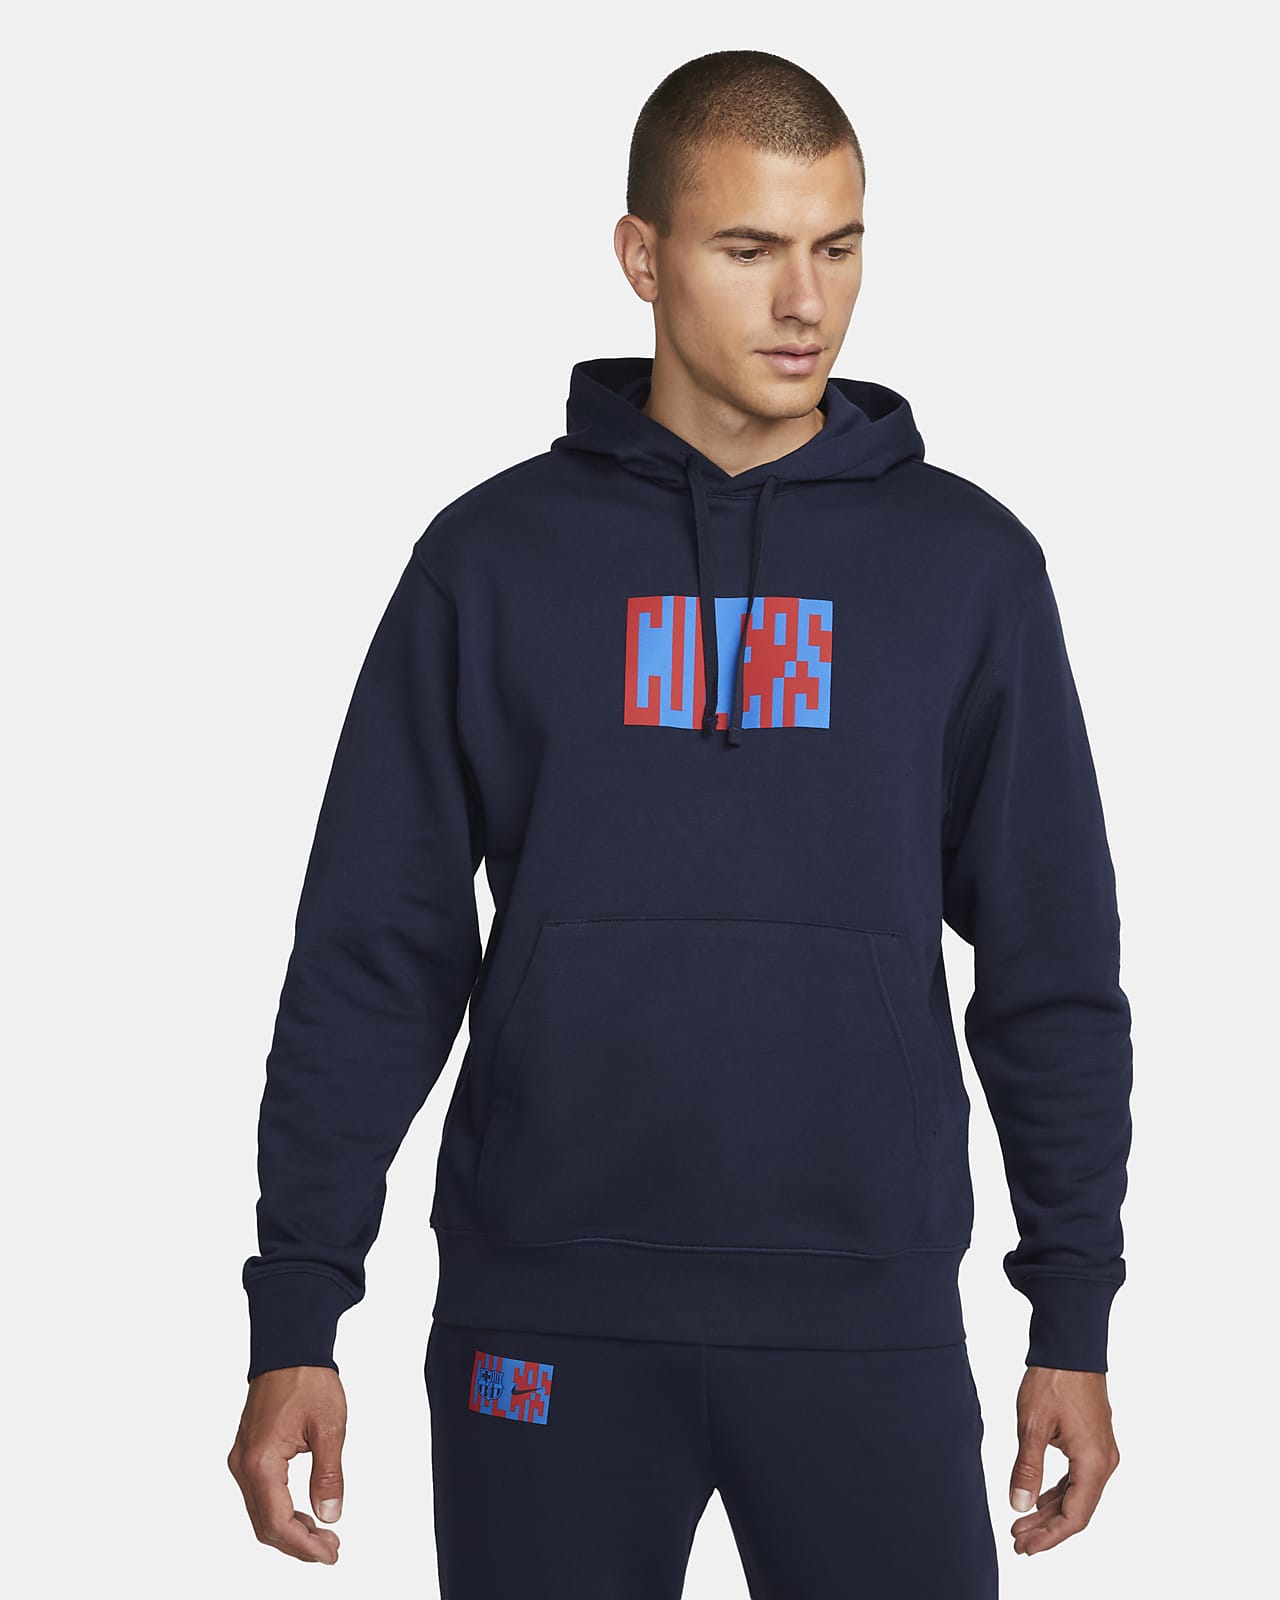 Barcelona Men's French Terry Soccer Hoodie. Nike.com